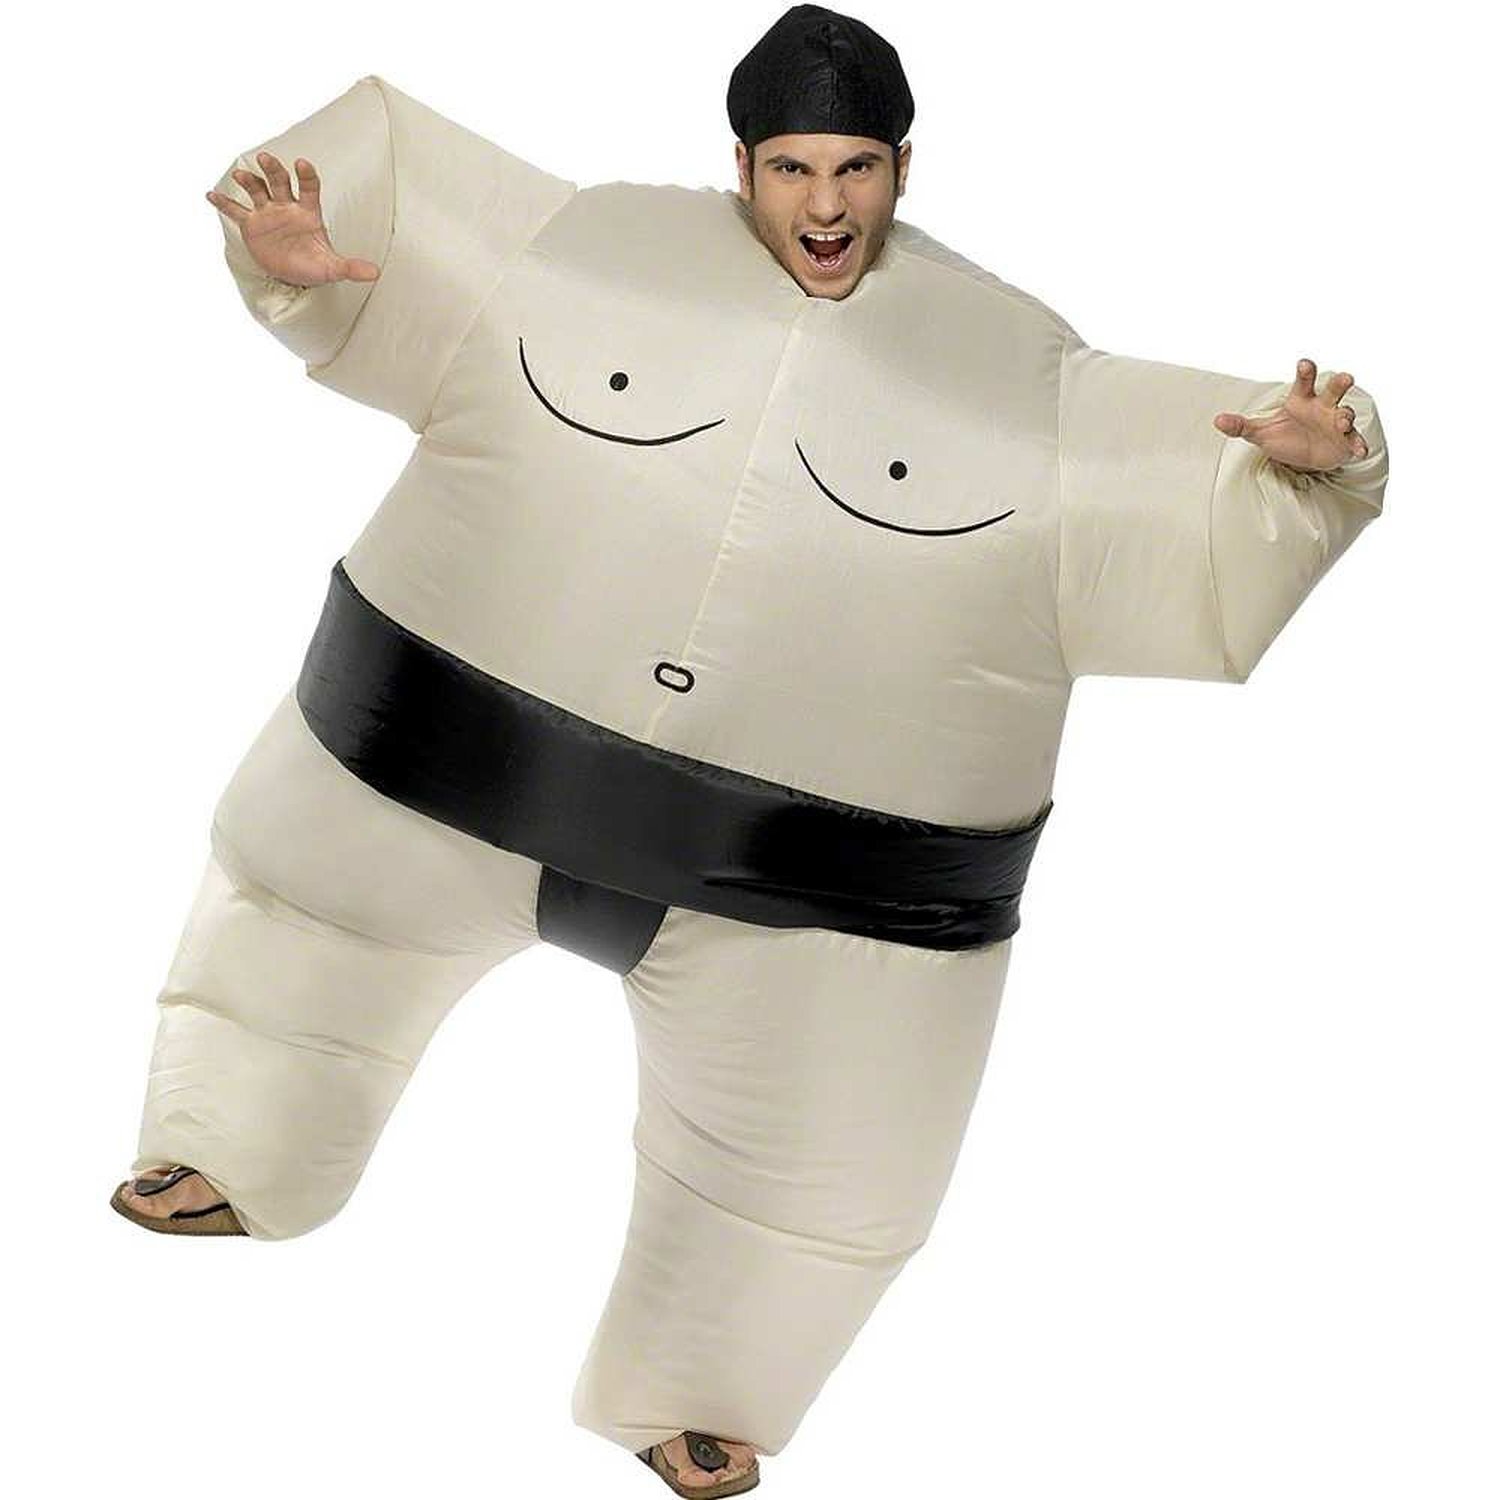 Collection of Sumo Wrestler Costumes.